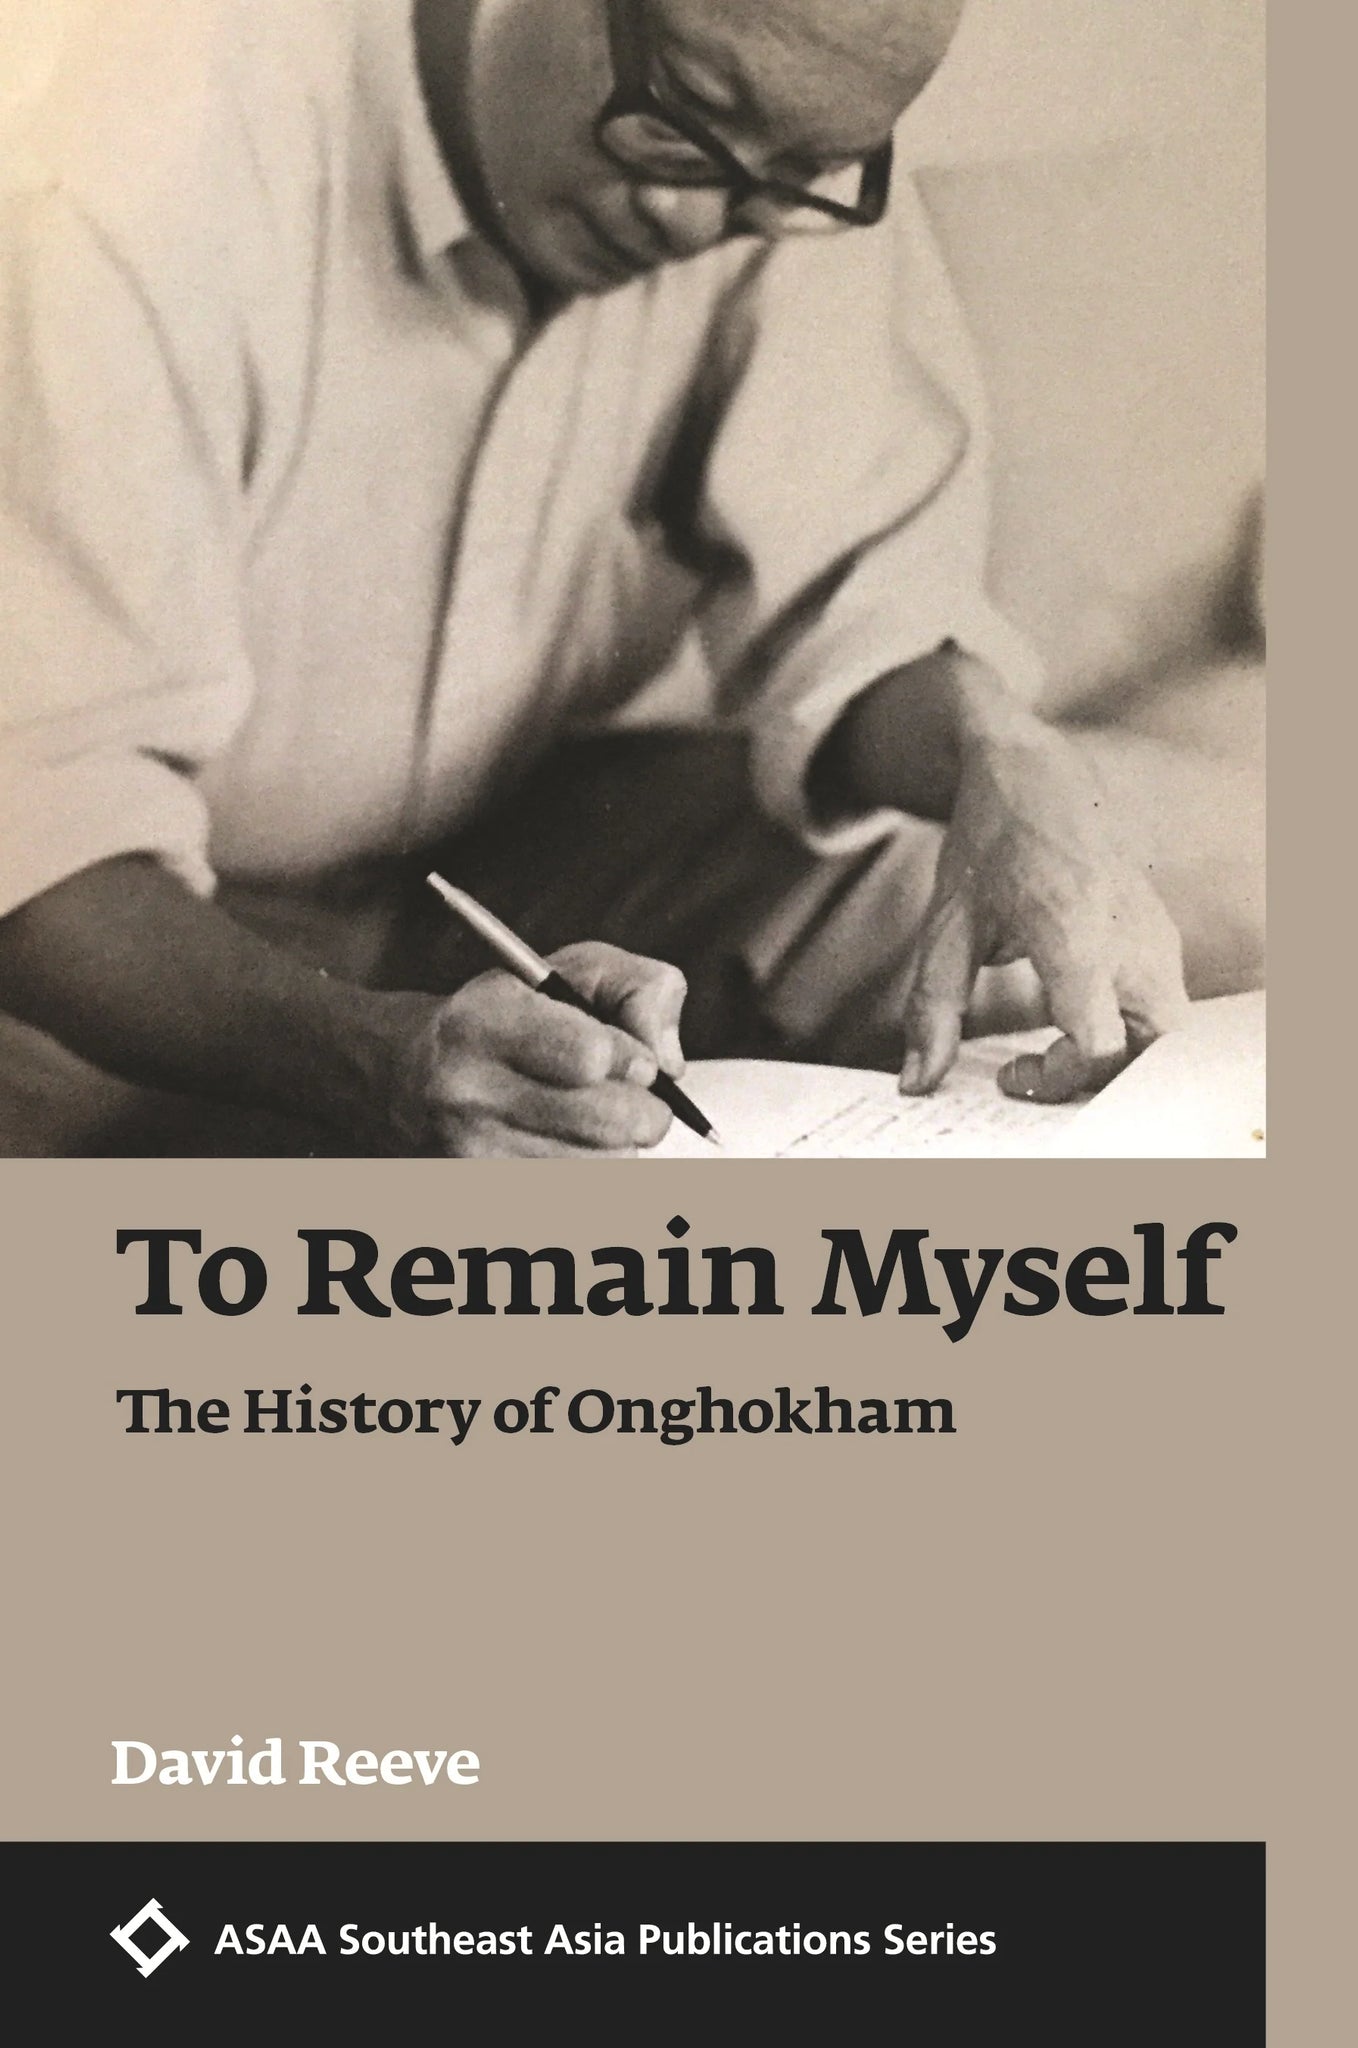 To Remain Myself: The History of Onghokham / by David Reeve